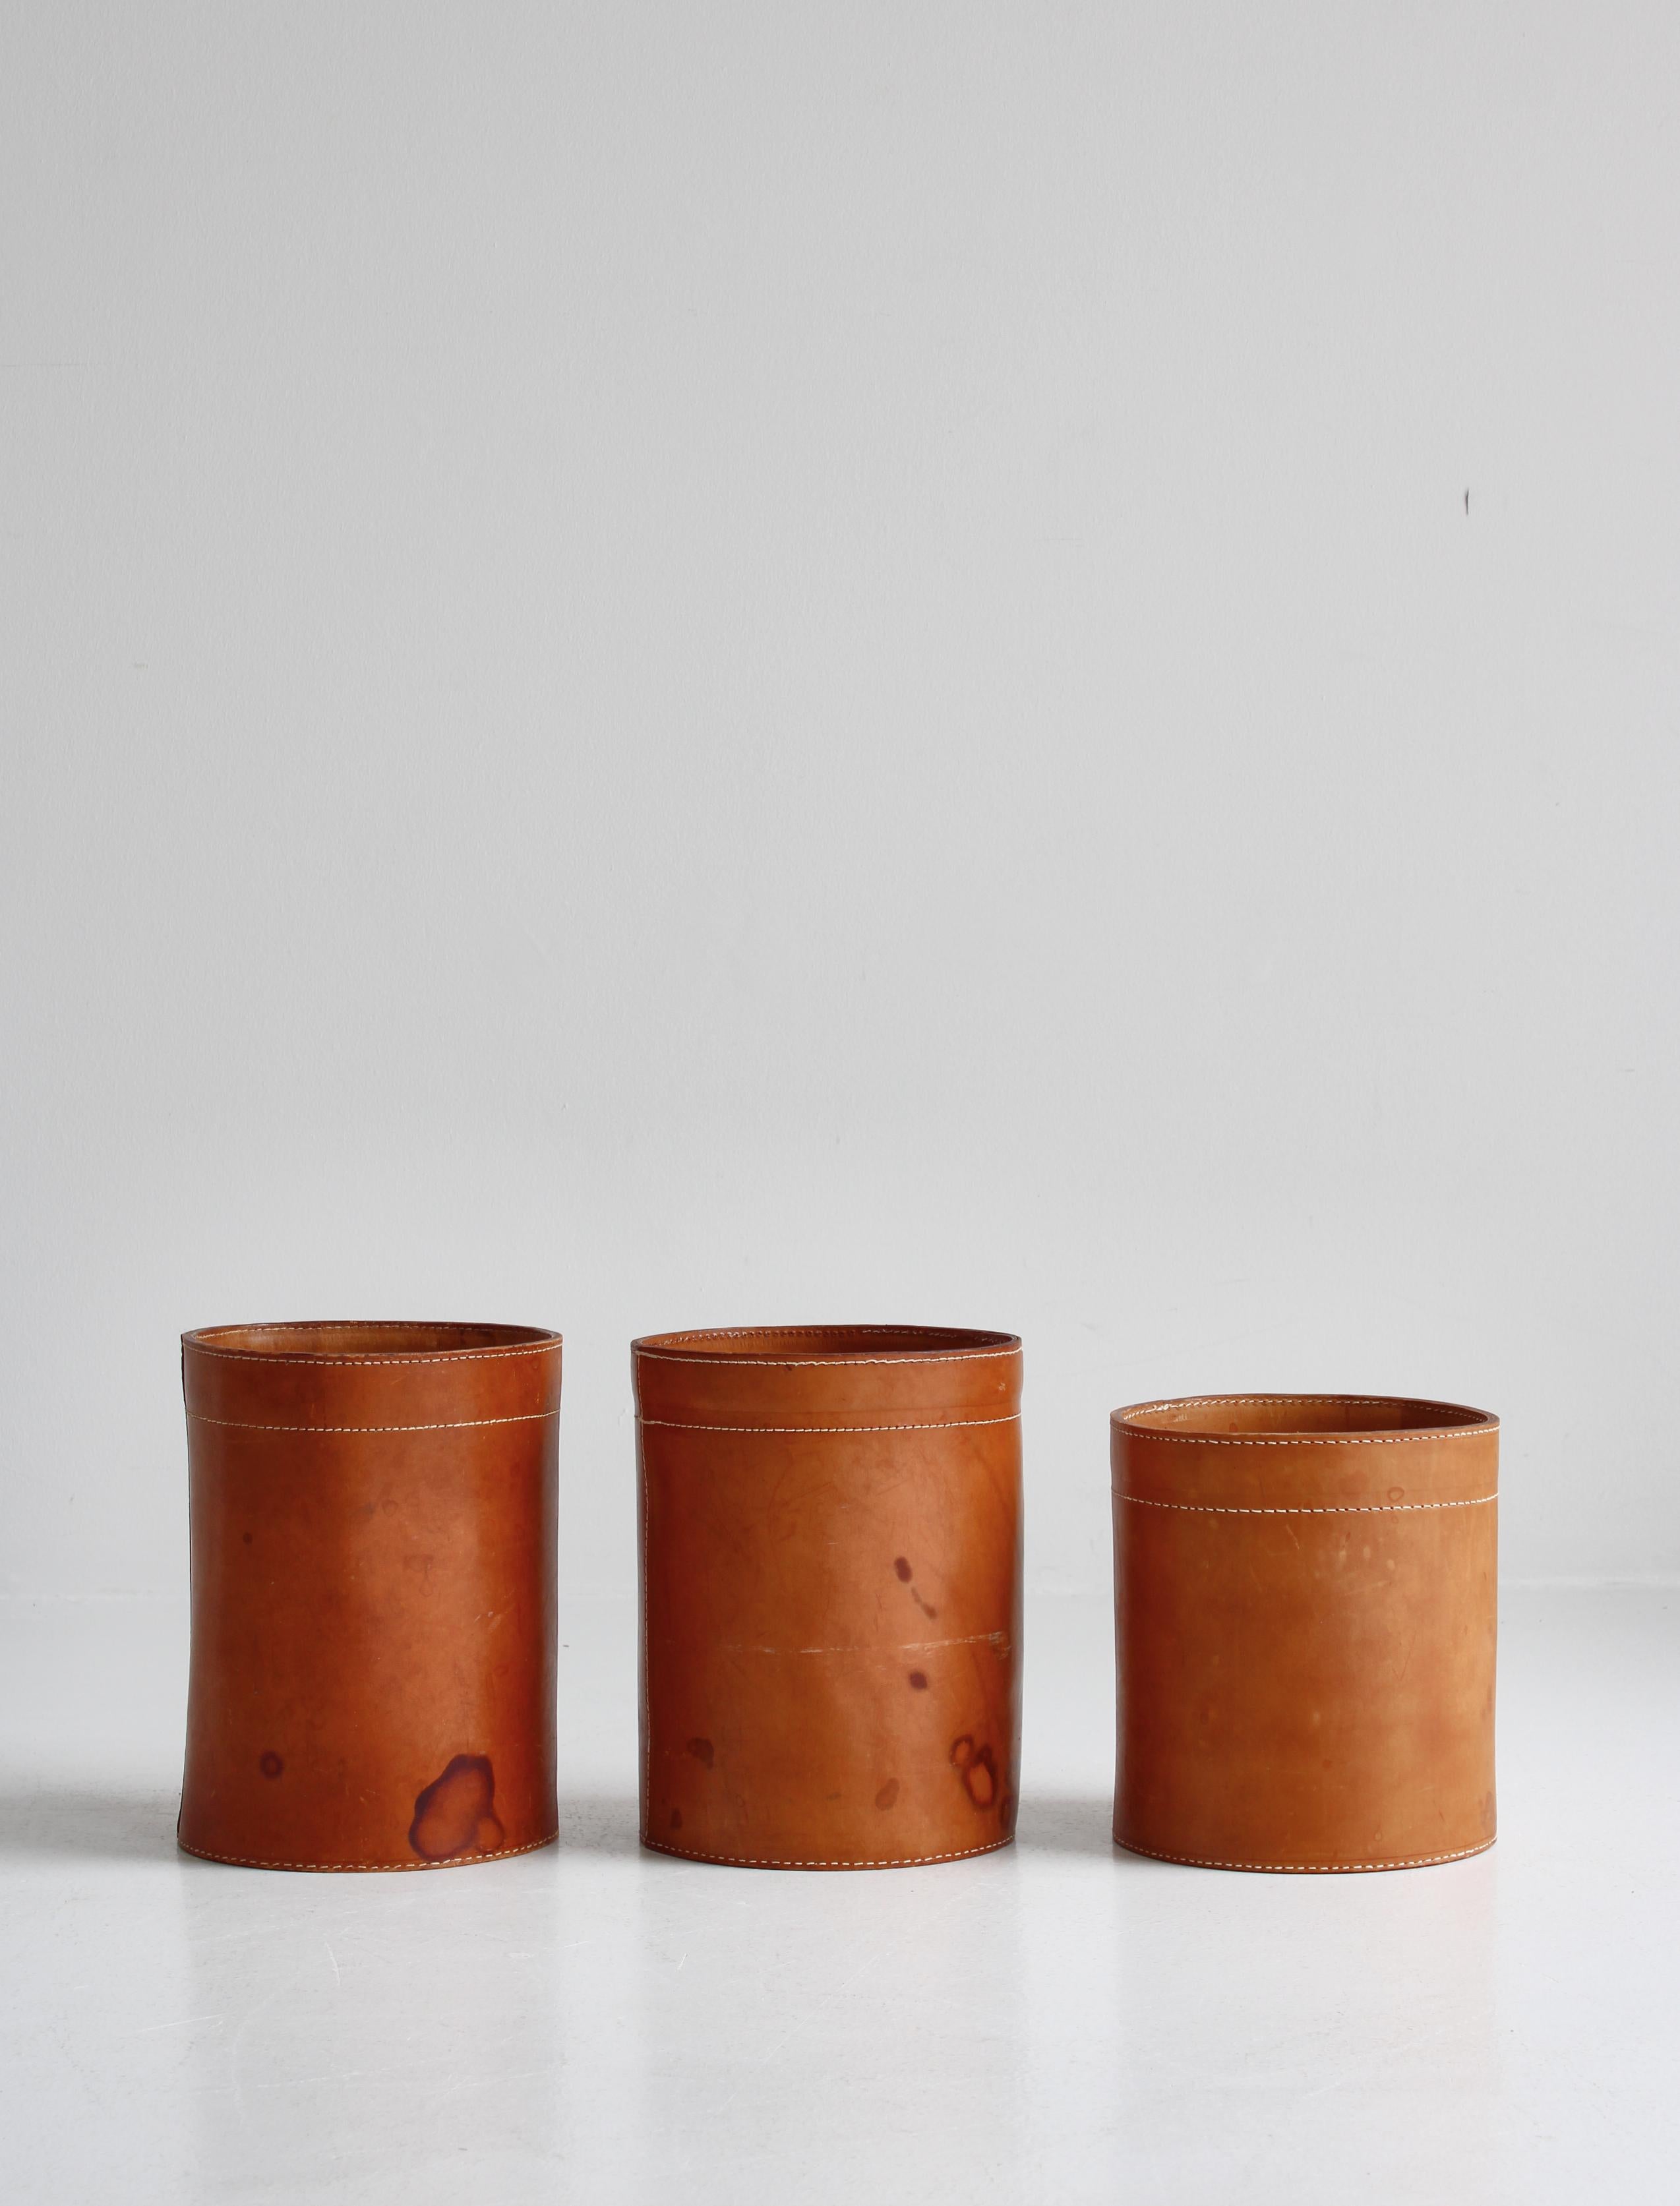 Collection of Leather Baskets / Paper Bins by Ørskov & Co, Denmark, 1960s In Good Condition For Sale In Odense, DK